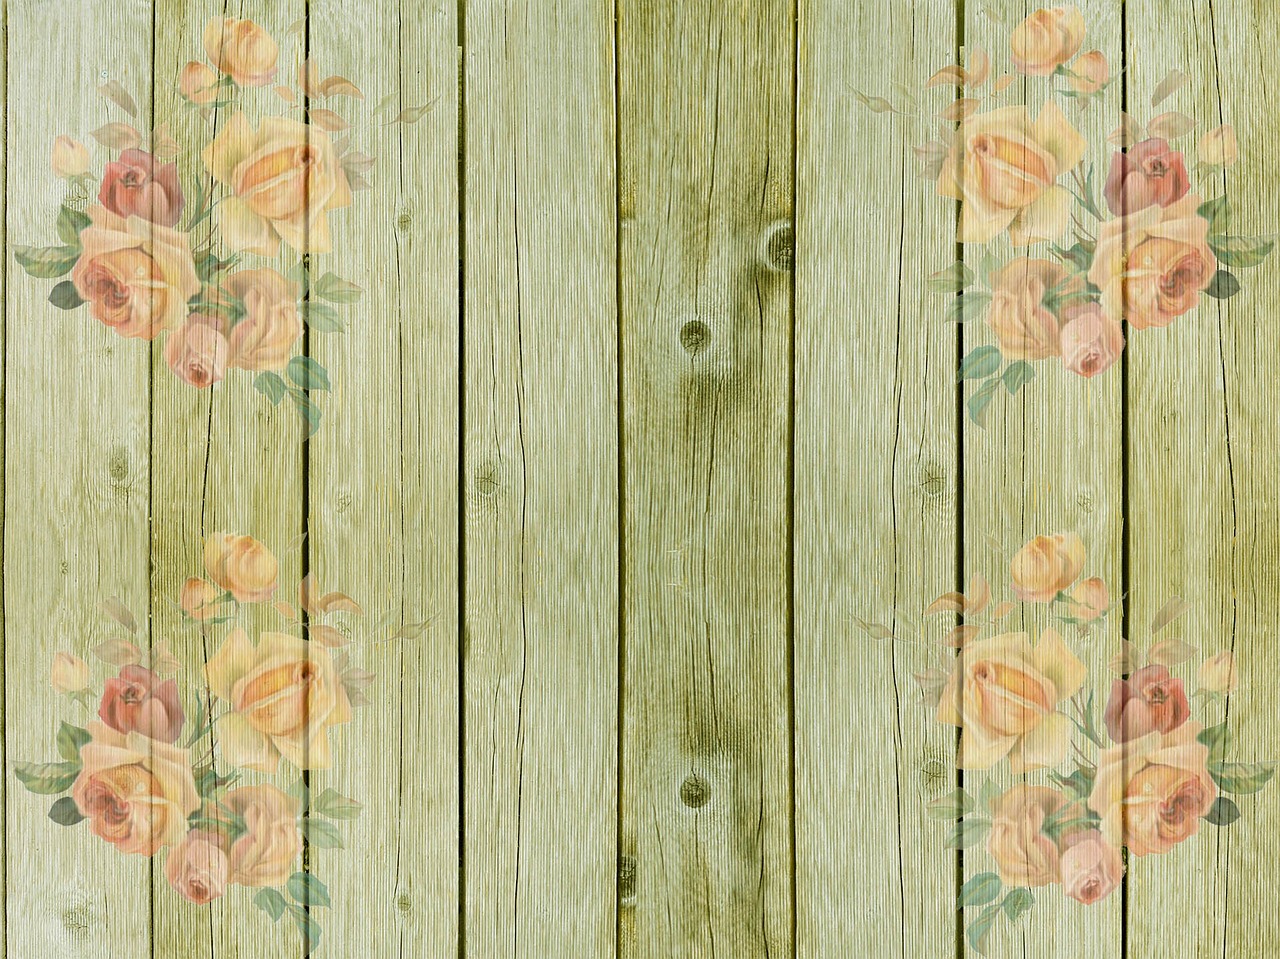 on wood wooden wall green free photo